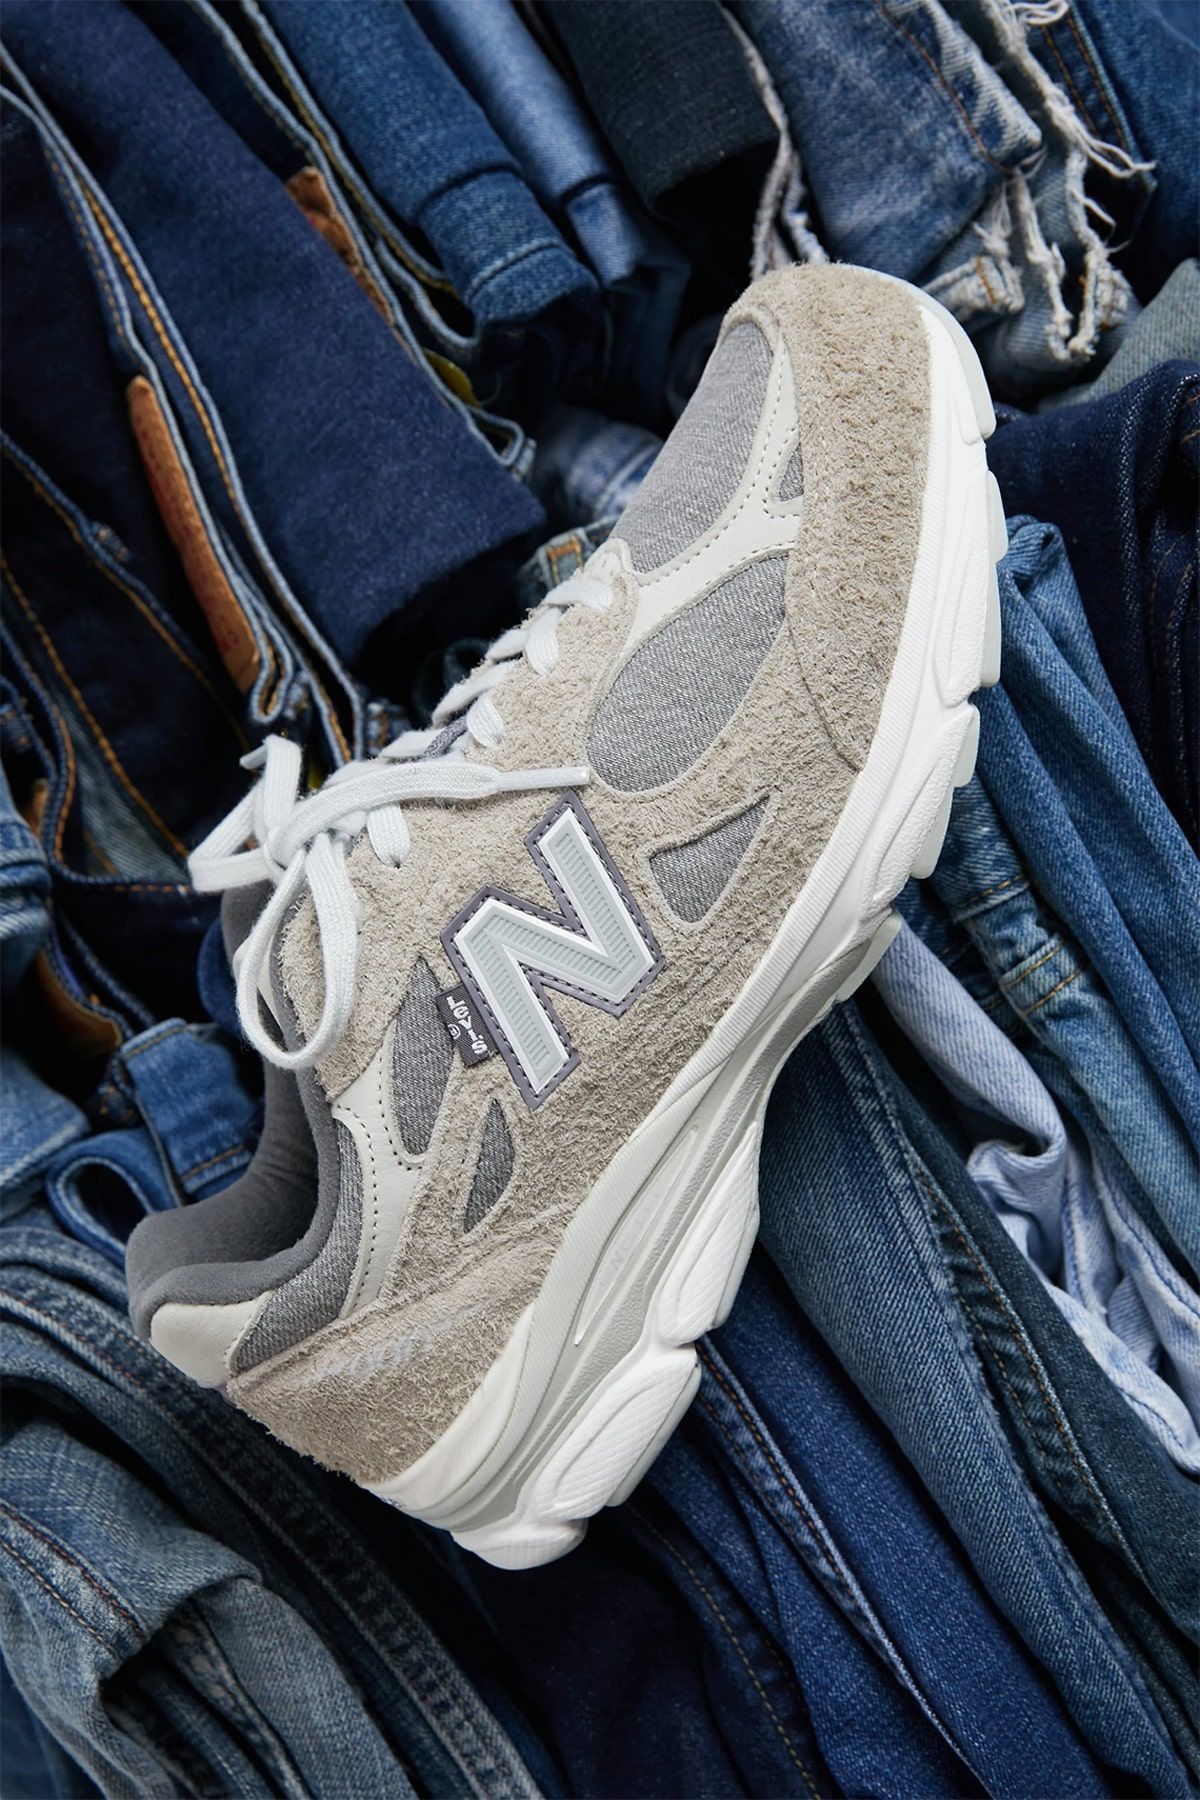 Levi's x New Balance 990v3 Pack Drops September 9th | HOUSE OF HEAT